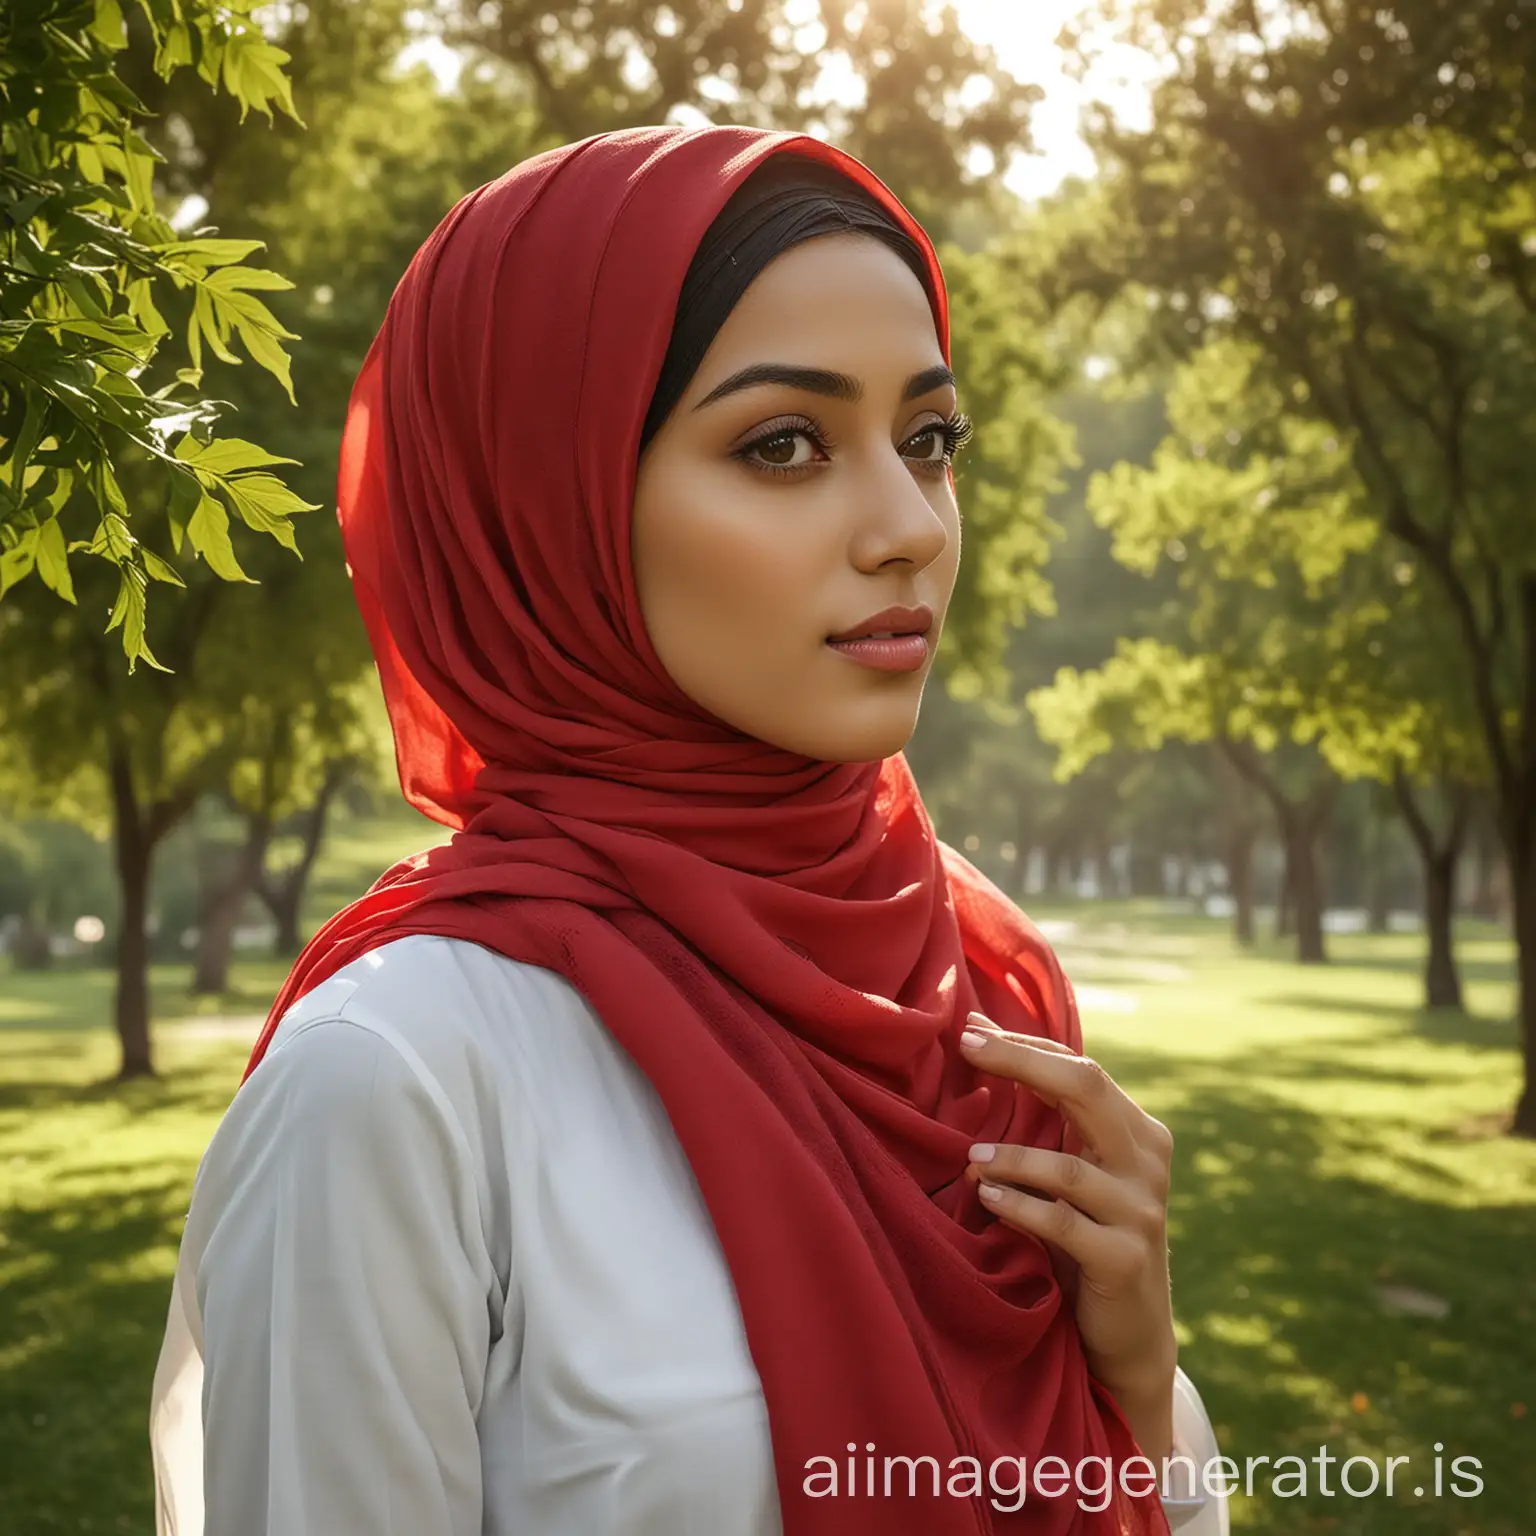 Create a realistic image of a Pakistani model standing in a lush, green park. The model is looking directly at the camera with a confident and serene expression. She is wearing a RED-colored georgette chiffon hijab, wrapped neatly around her head, covering her chest completely. Her simple white shirt adds to the modest and elegant appearance. The image is framed to show the model from the belly area upwards, emphasizing the natural beauty and texture of the hijab. The background should include vibrant trees and soft sunlight filtering through the leaves, enhancing the overall peaceful and realistic atmosphere. The model should have natural skin tones, and her features should be lifelike to create a genuine and relatable image for the hijab brand.